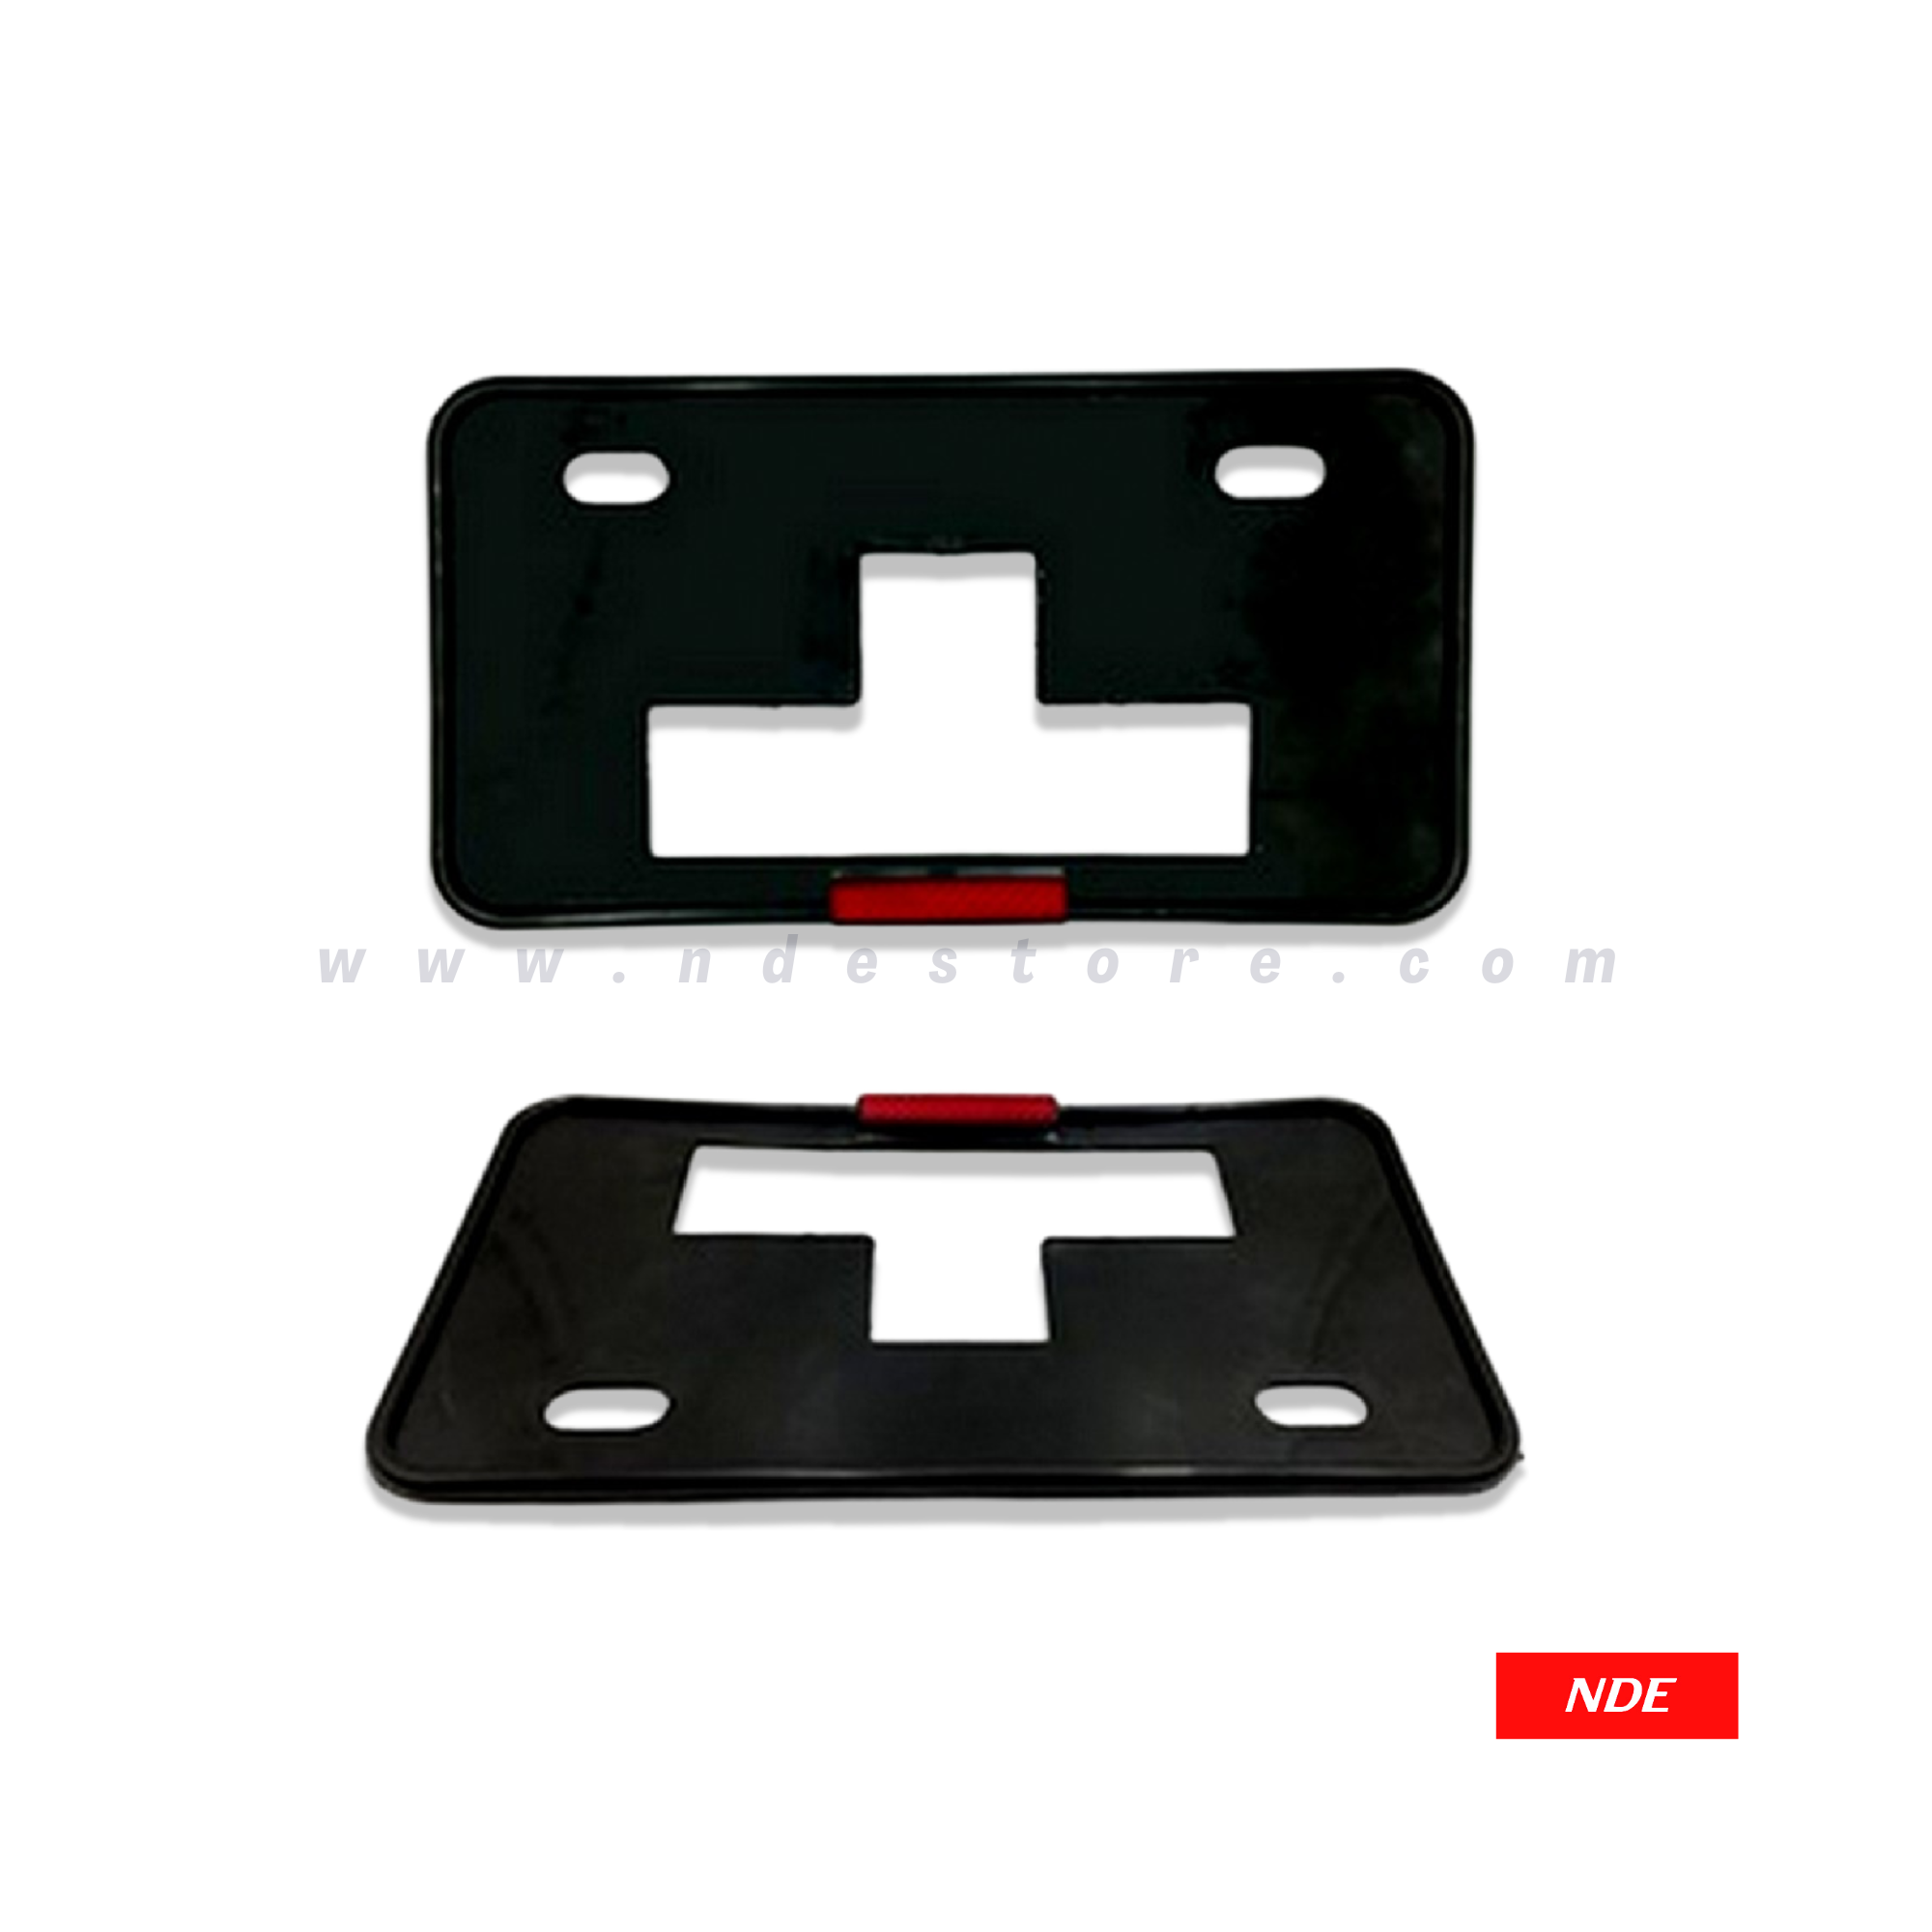 NUMBER PLATE LICENSE PLATE HOLDERS